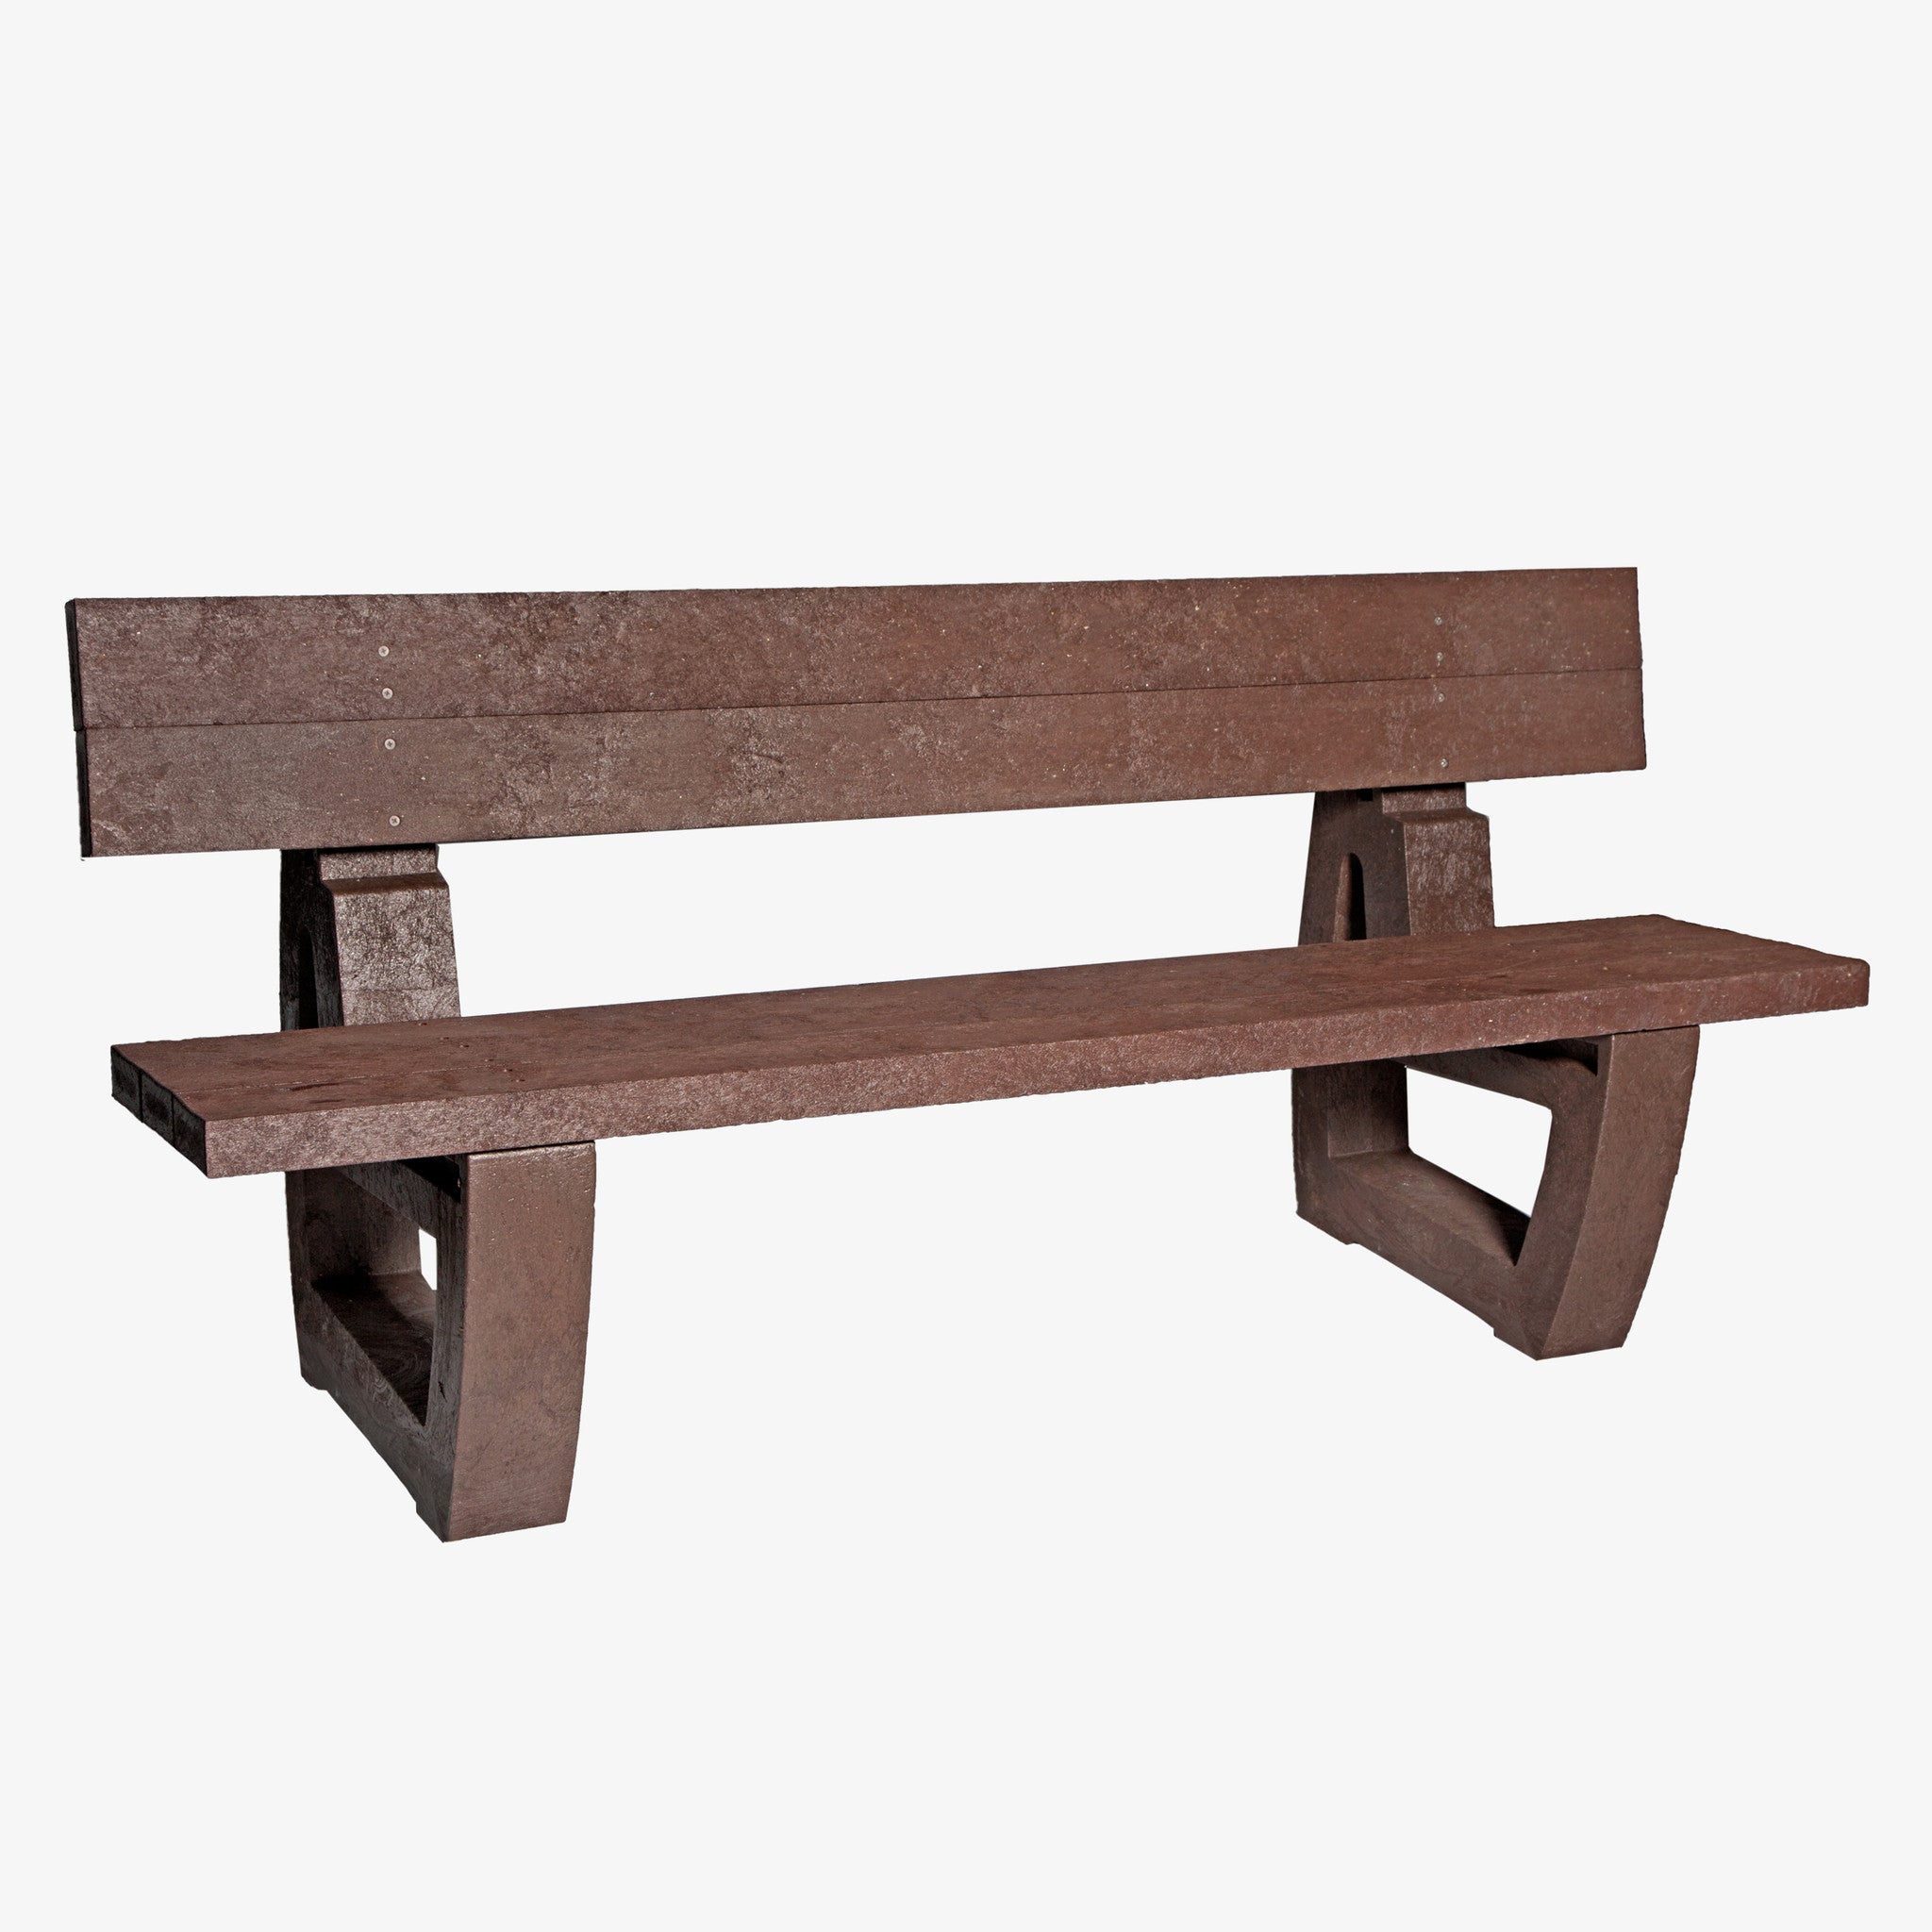 Manticore Lumber brown recycled plastic bench